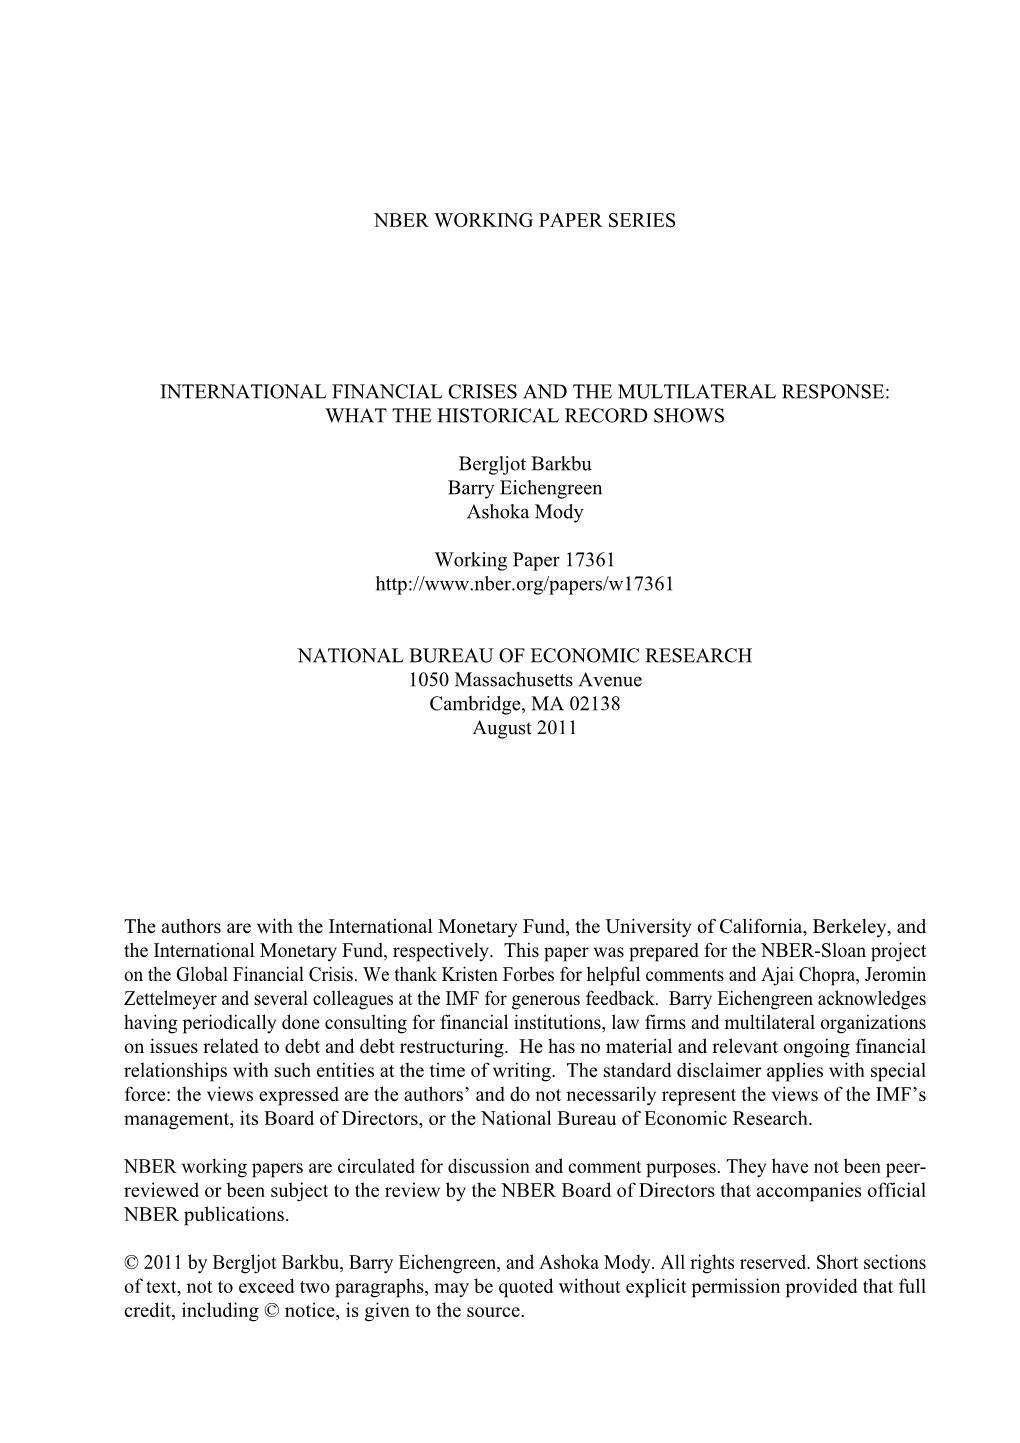 International Financial Crises and the Multilateral Response: What the Historical Record Shows